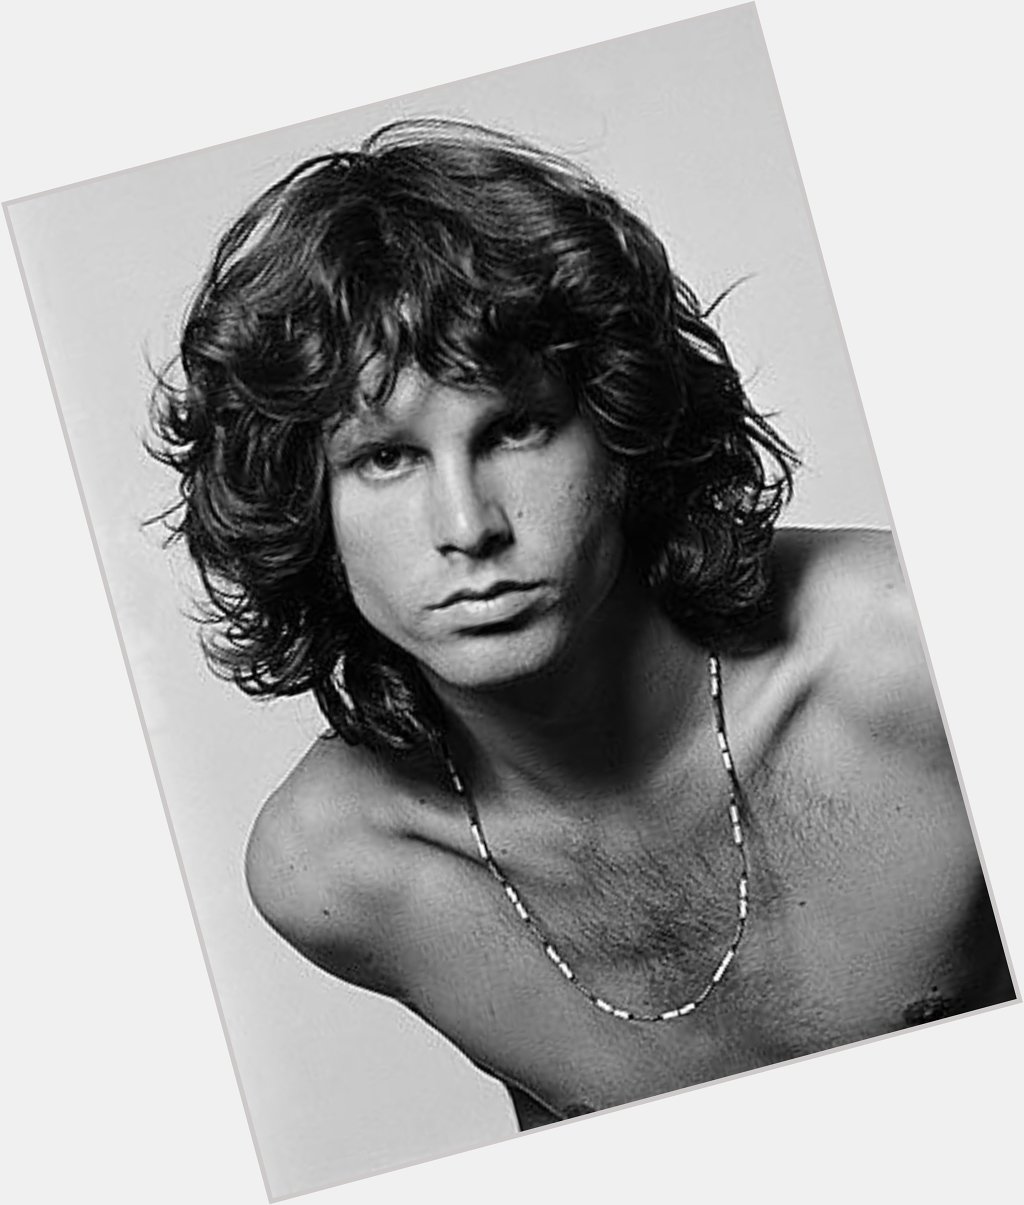 Happy birthday to the \"Lizard King\" himself, the iconic Jim Morrison (R.I.P)   